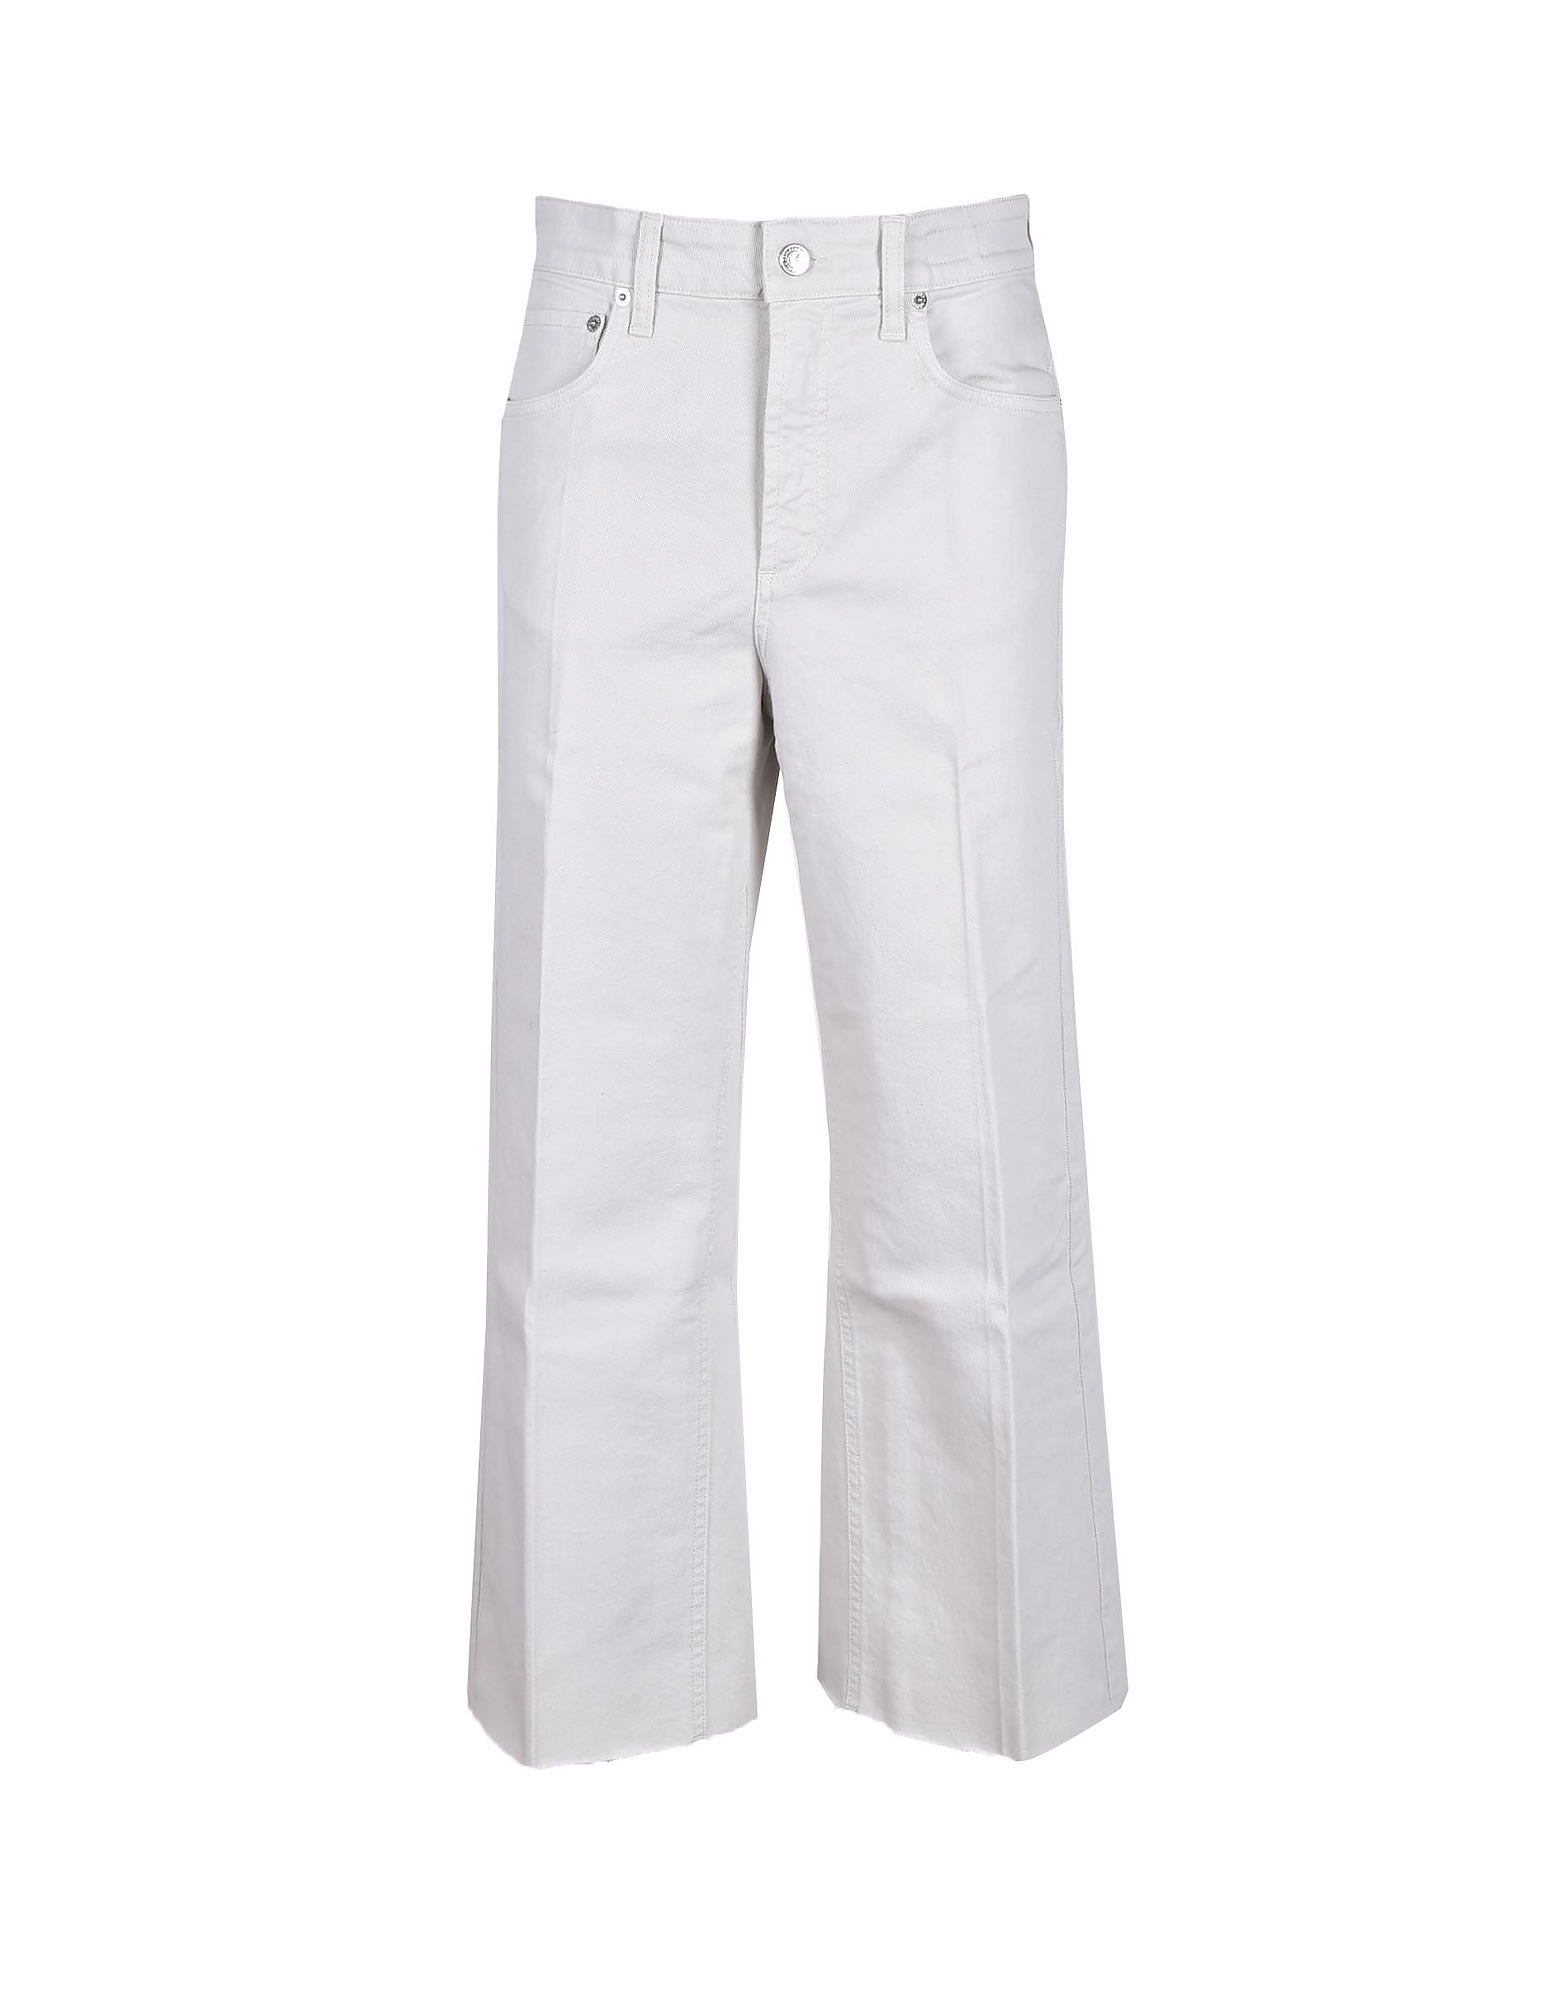 Department Five Womens Ivory Jeans